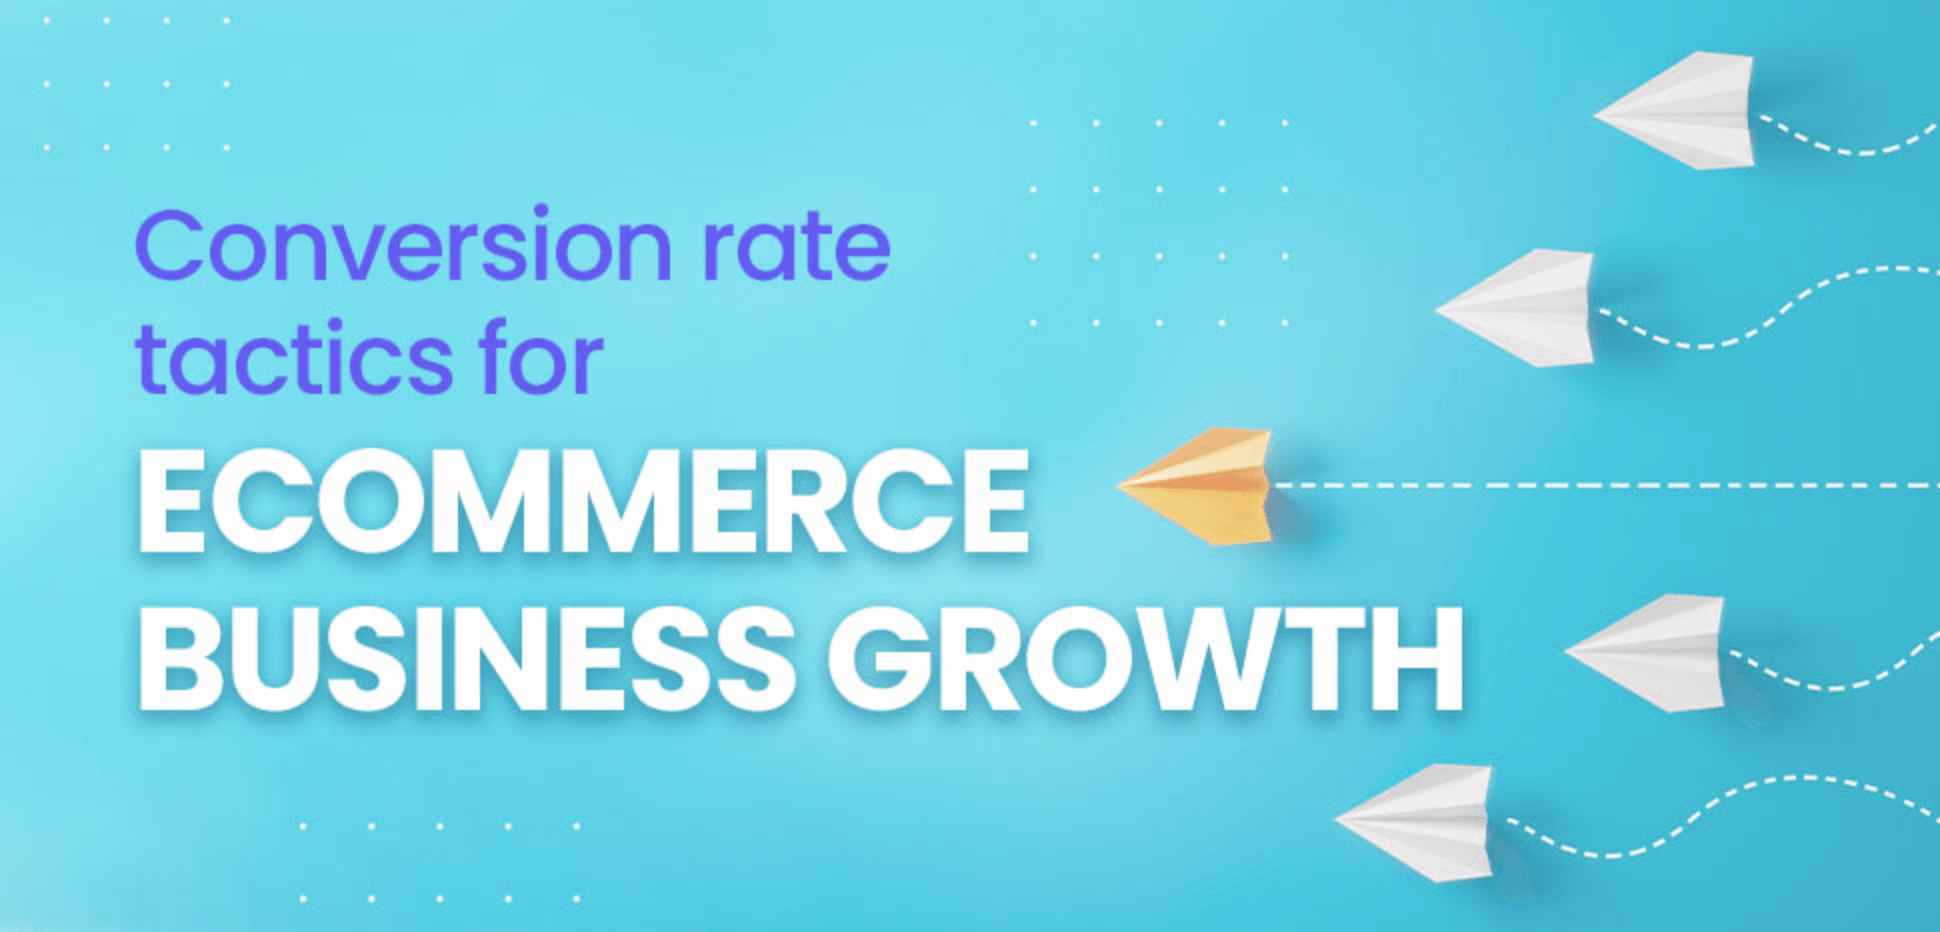 Conversion rate tactics for eCommerce business growth